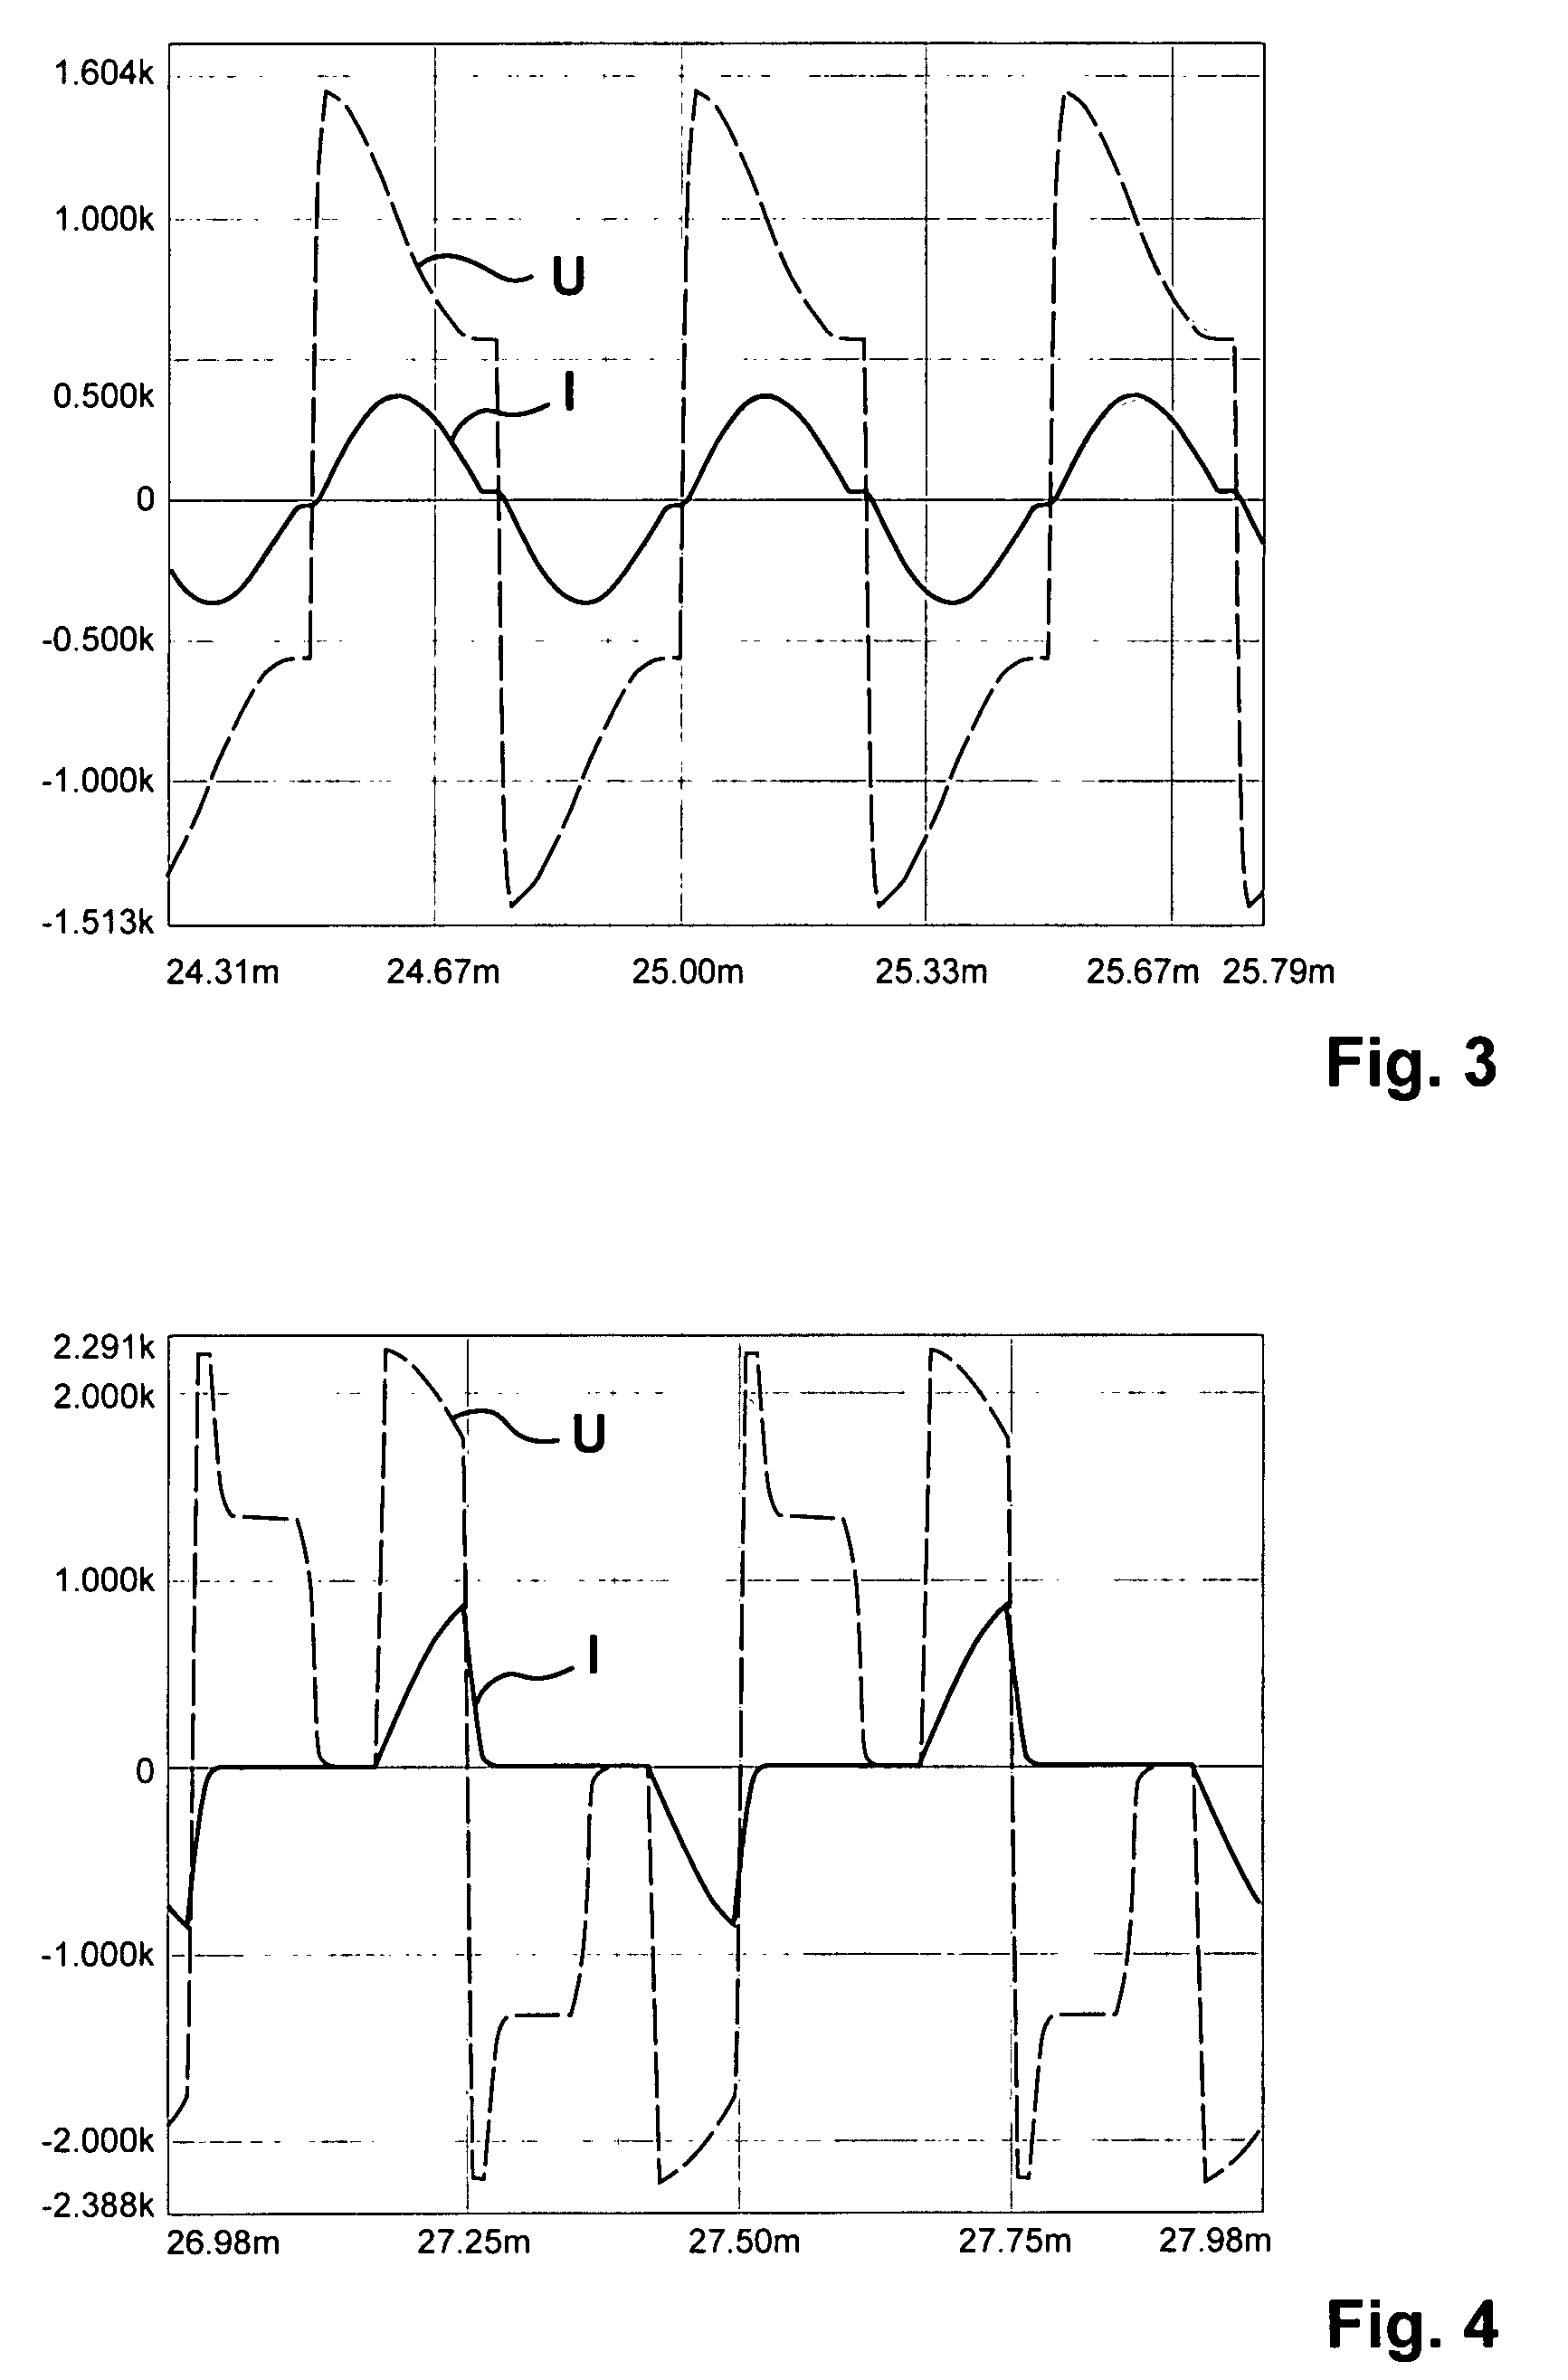 Device for feeding electrical energy from an energy source